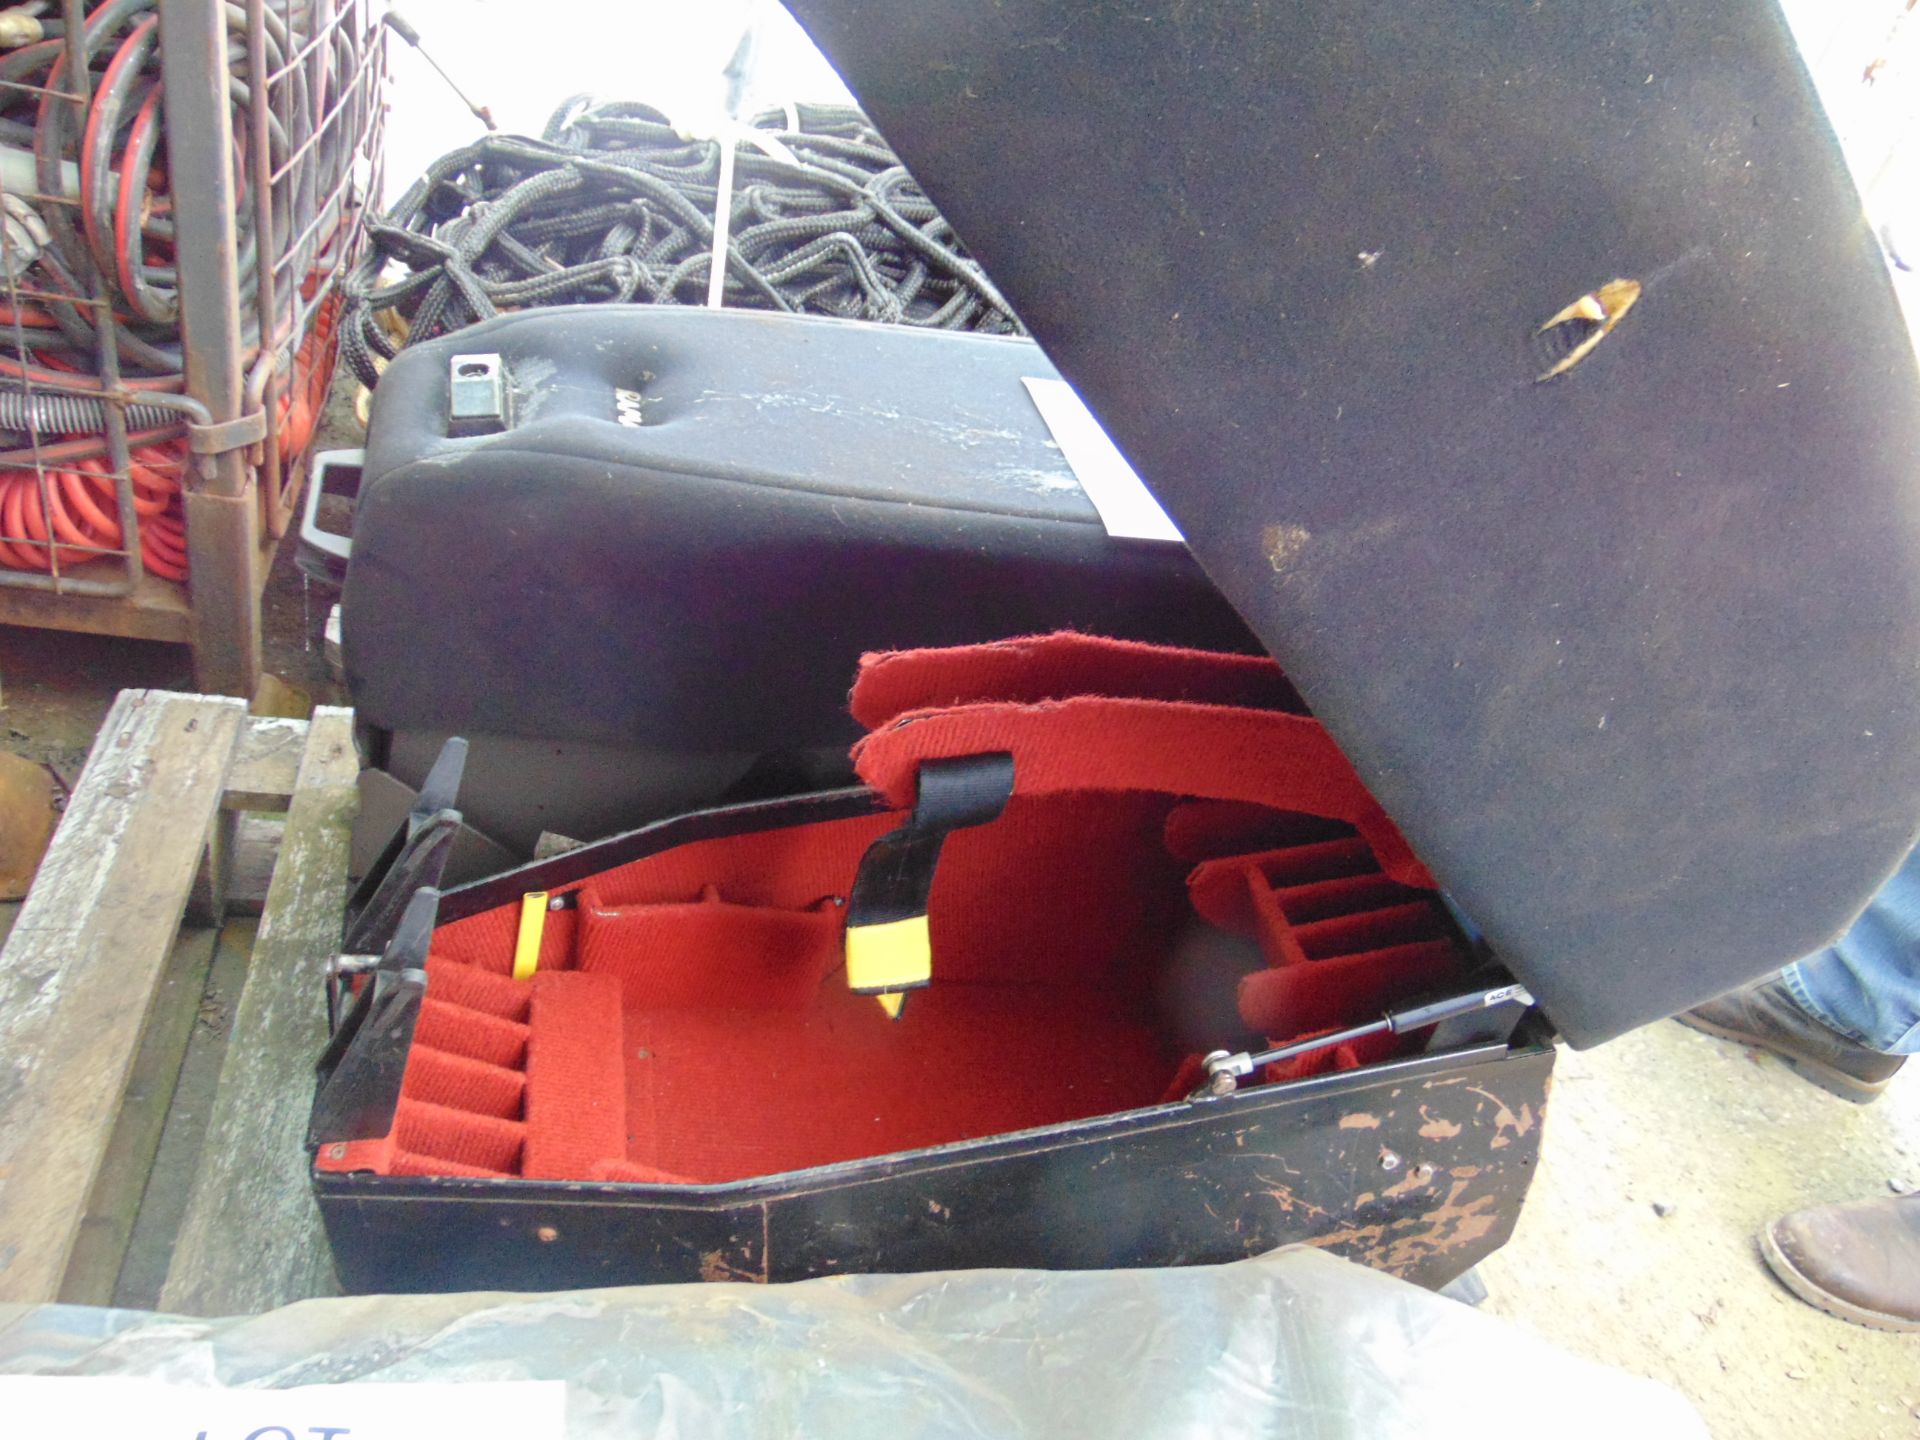 RAMAR Vehicle Secure Weapons Cases as Shown - Image 3 of 3